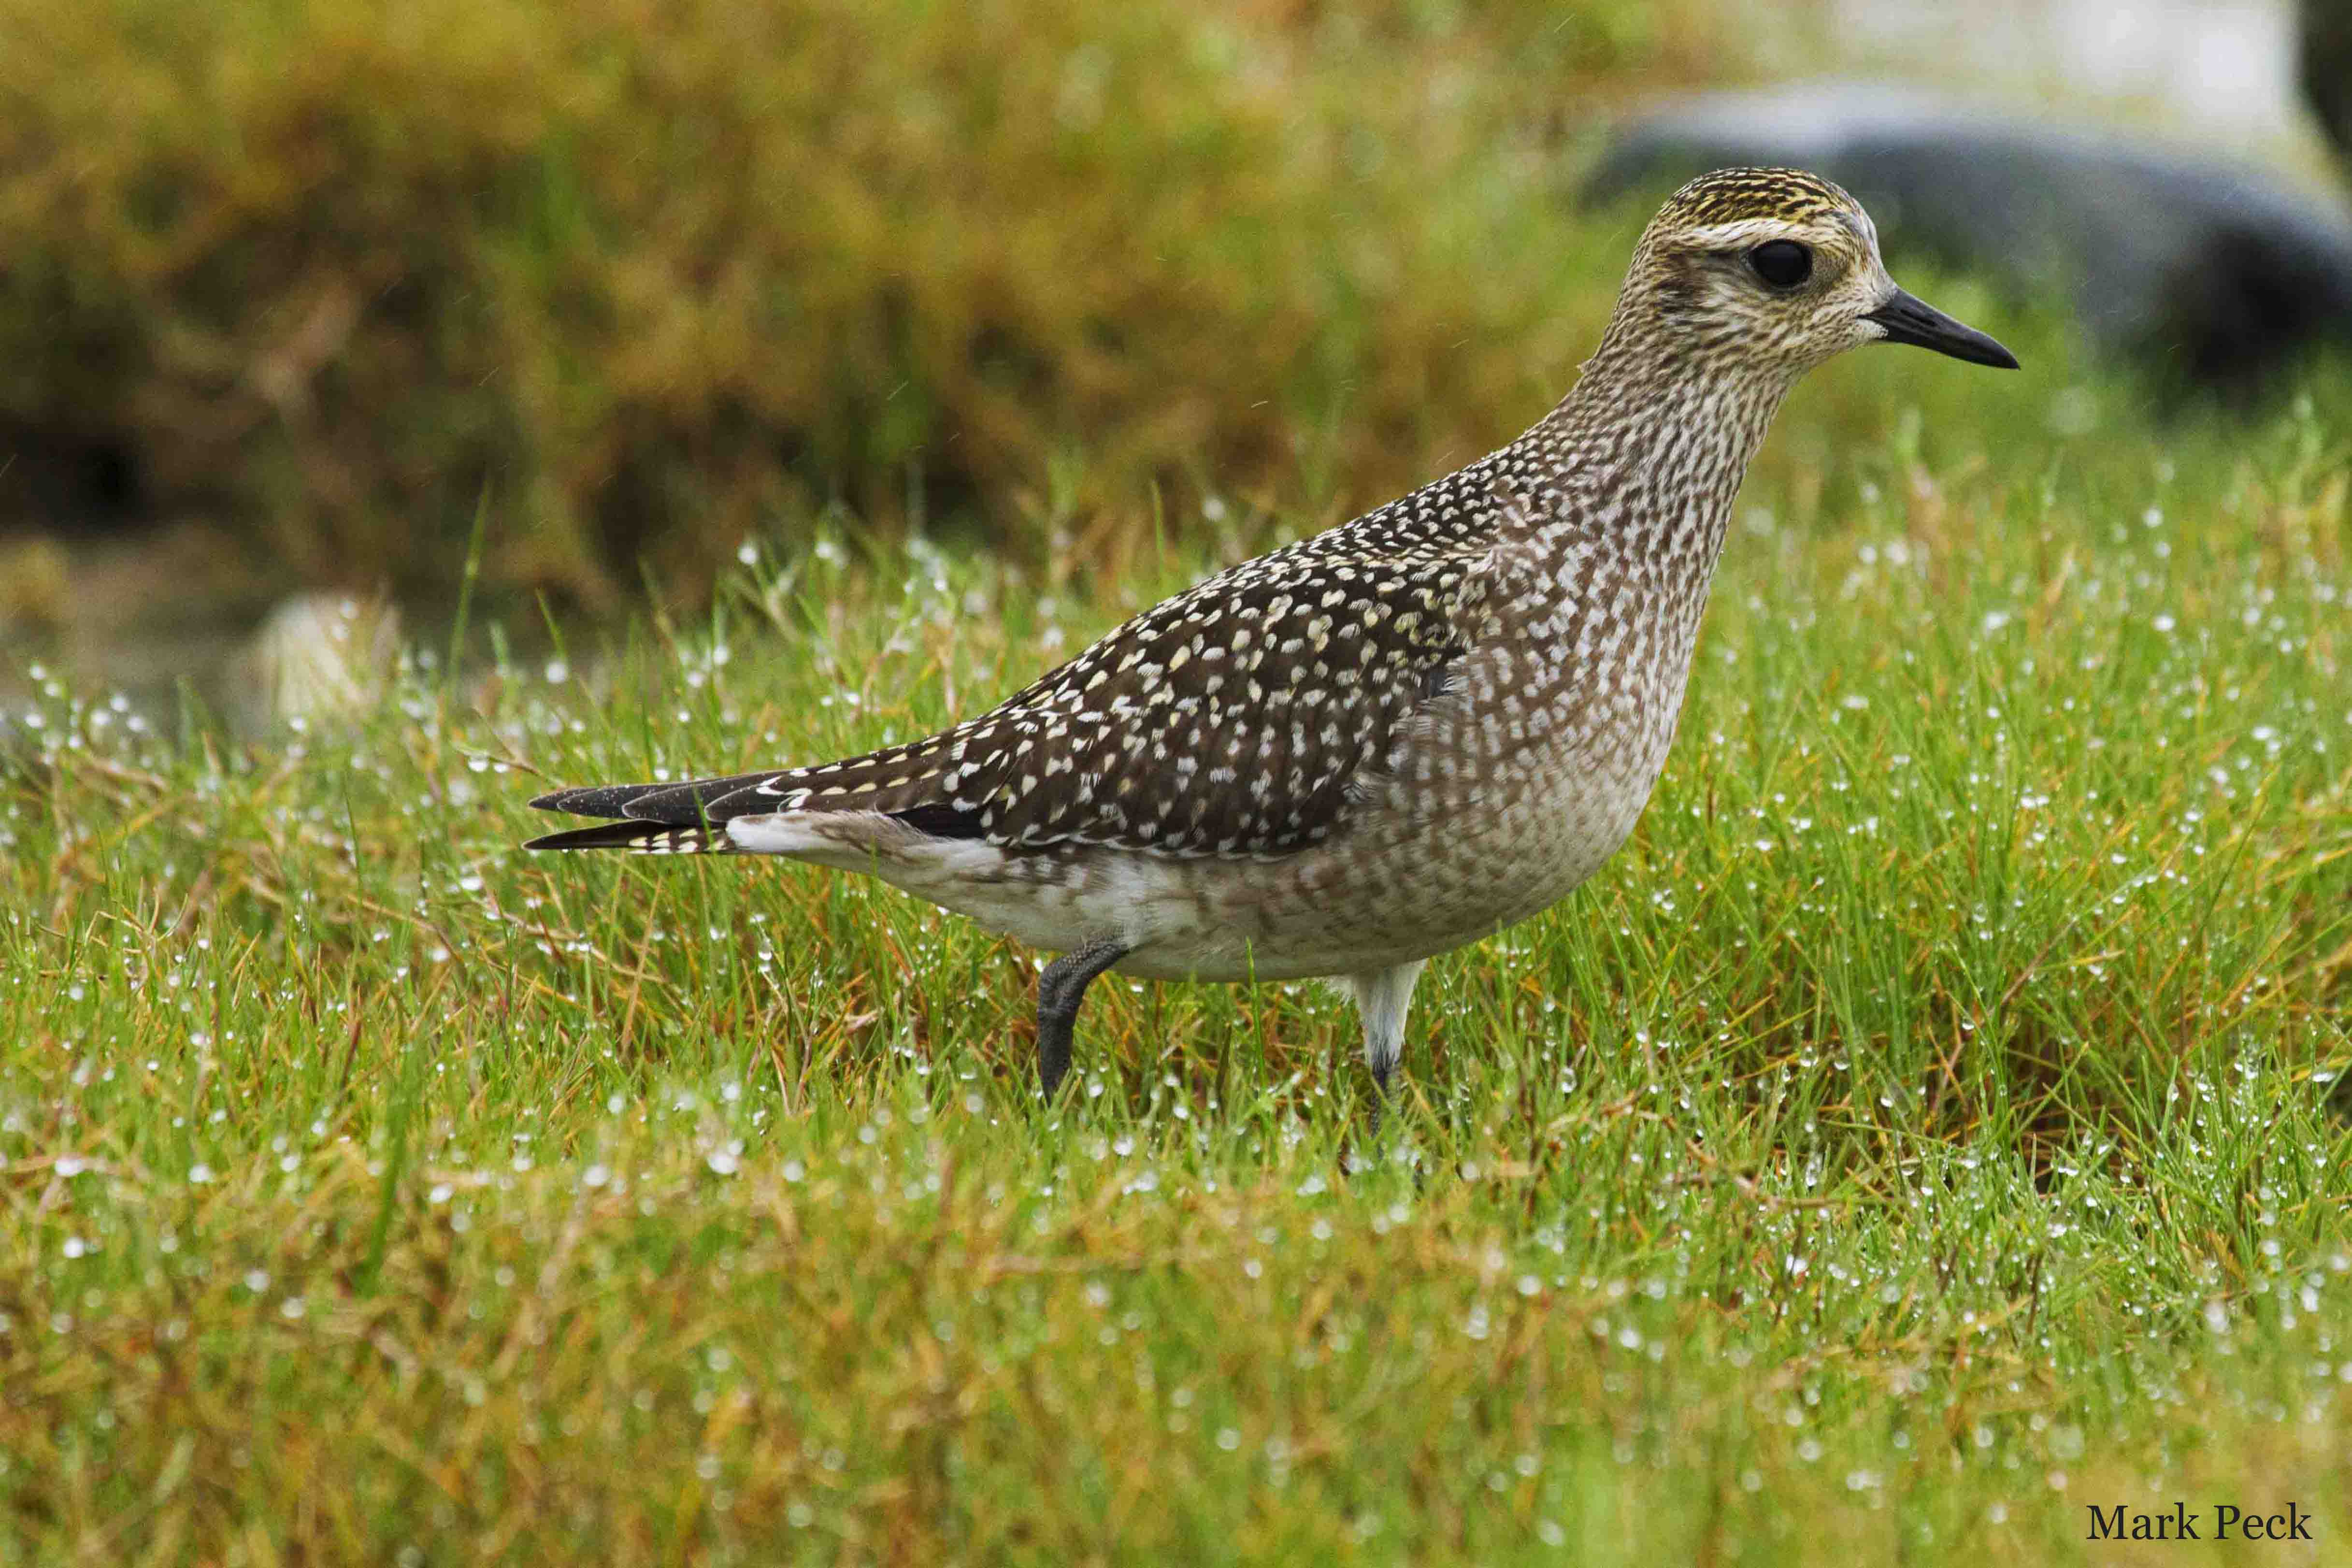 American golden plover. Photo © Mark Peck/Flickr through a creative commons license